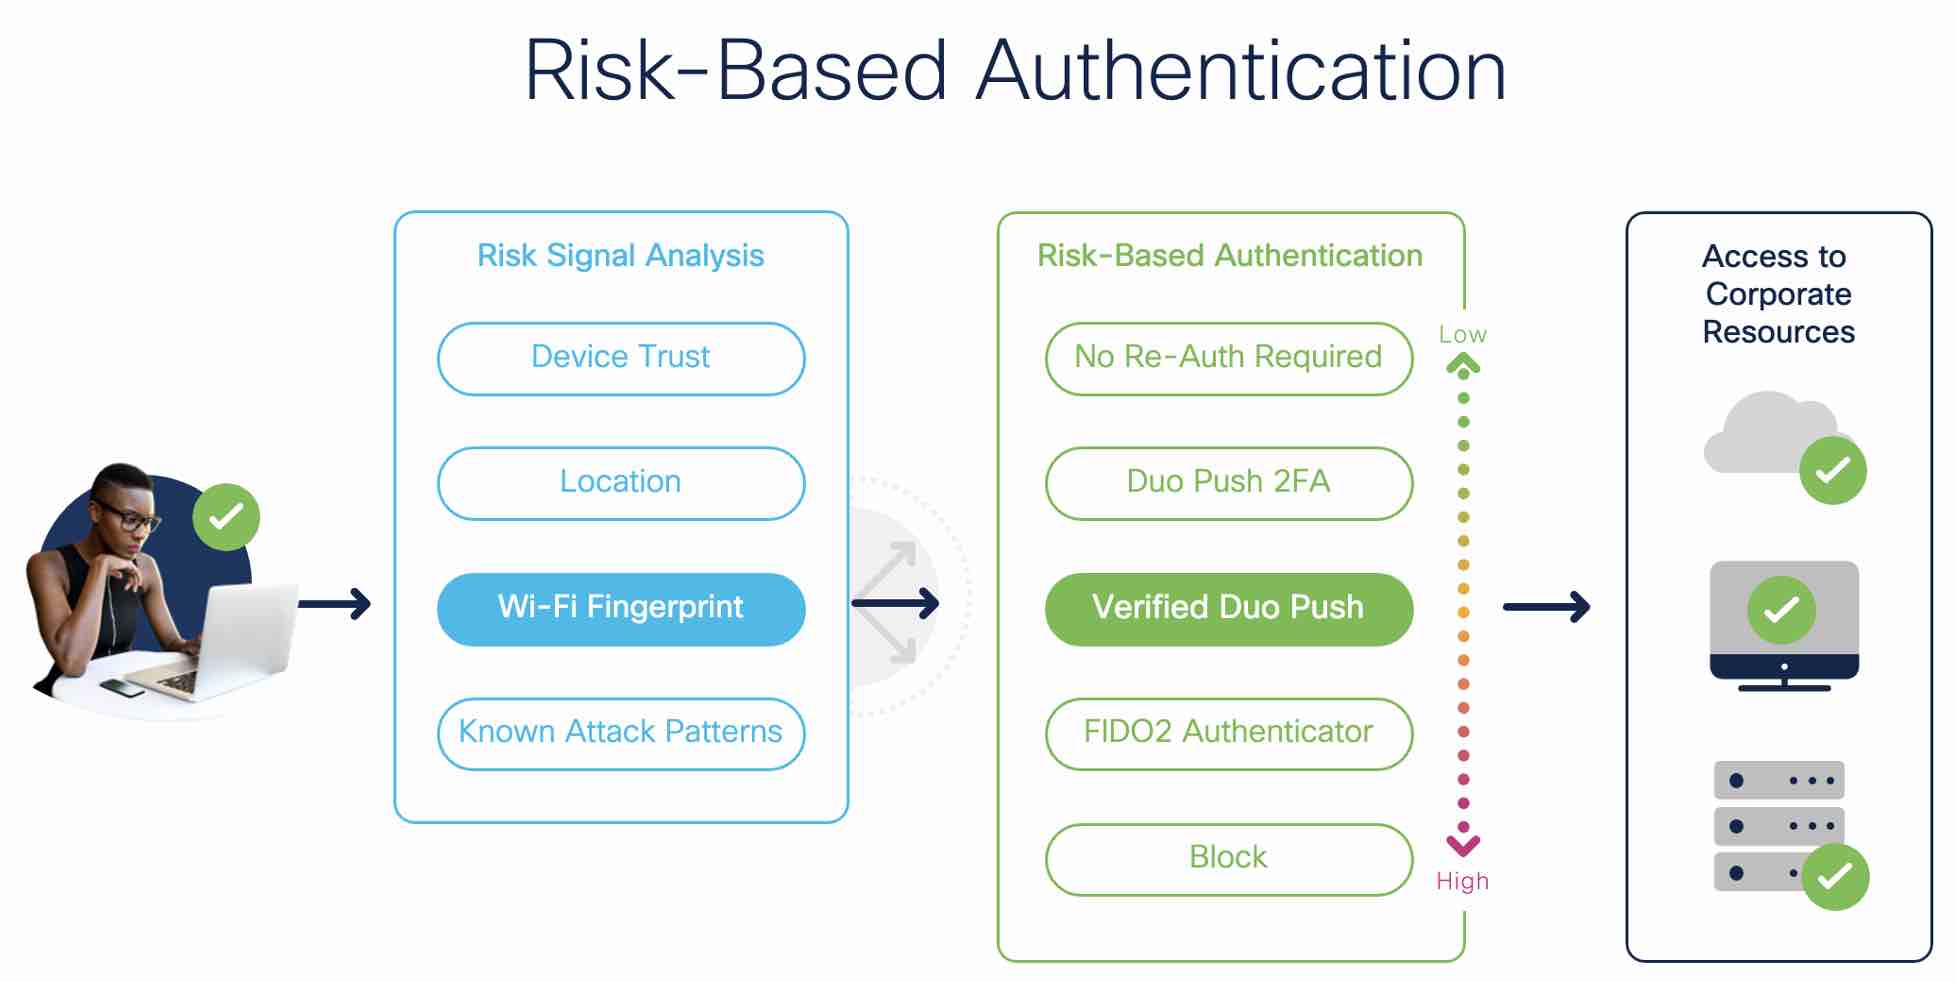 Graphic showing how risk-based authentication works